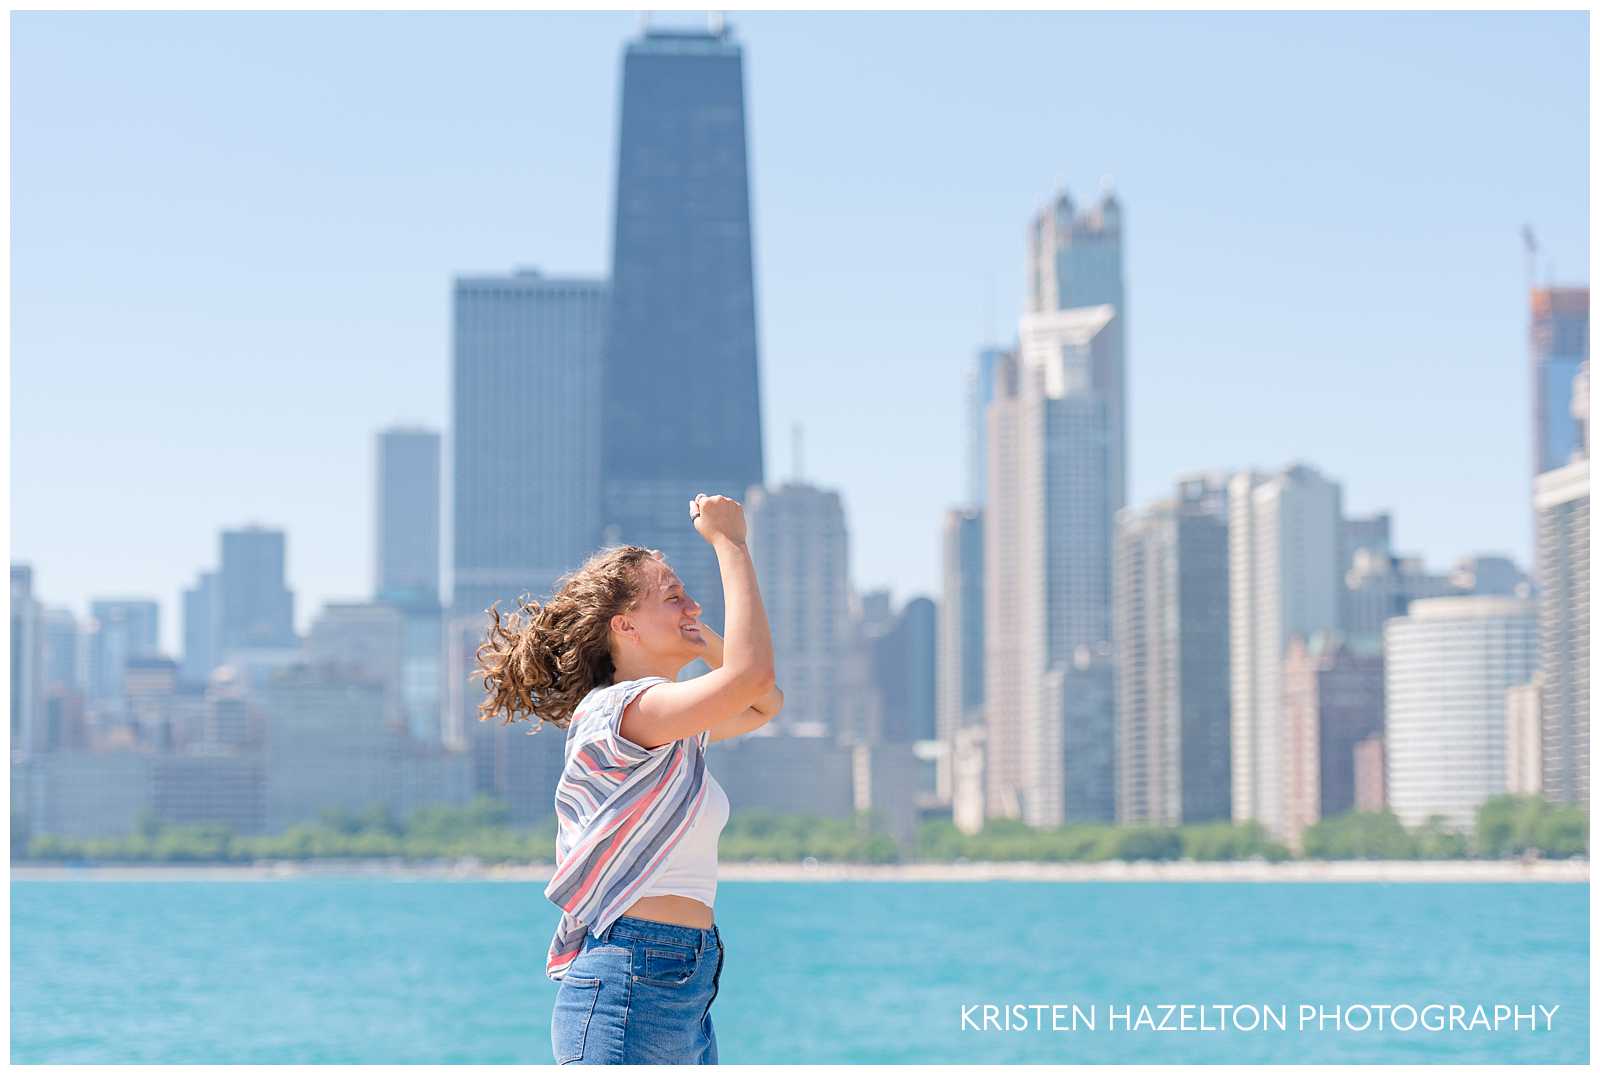 High school senior girl with hair blowing in the wind at Chicago's North Avenue Beach